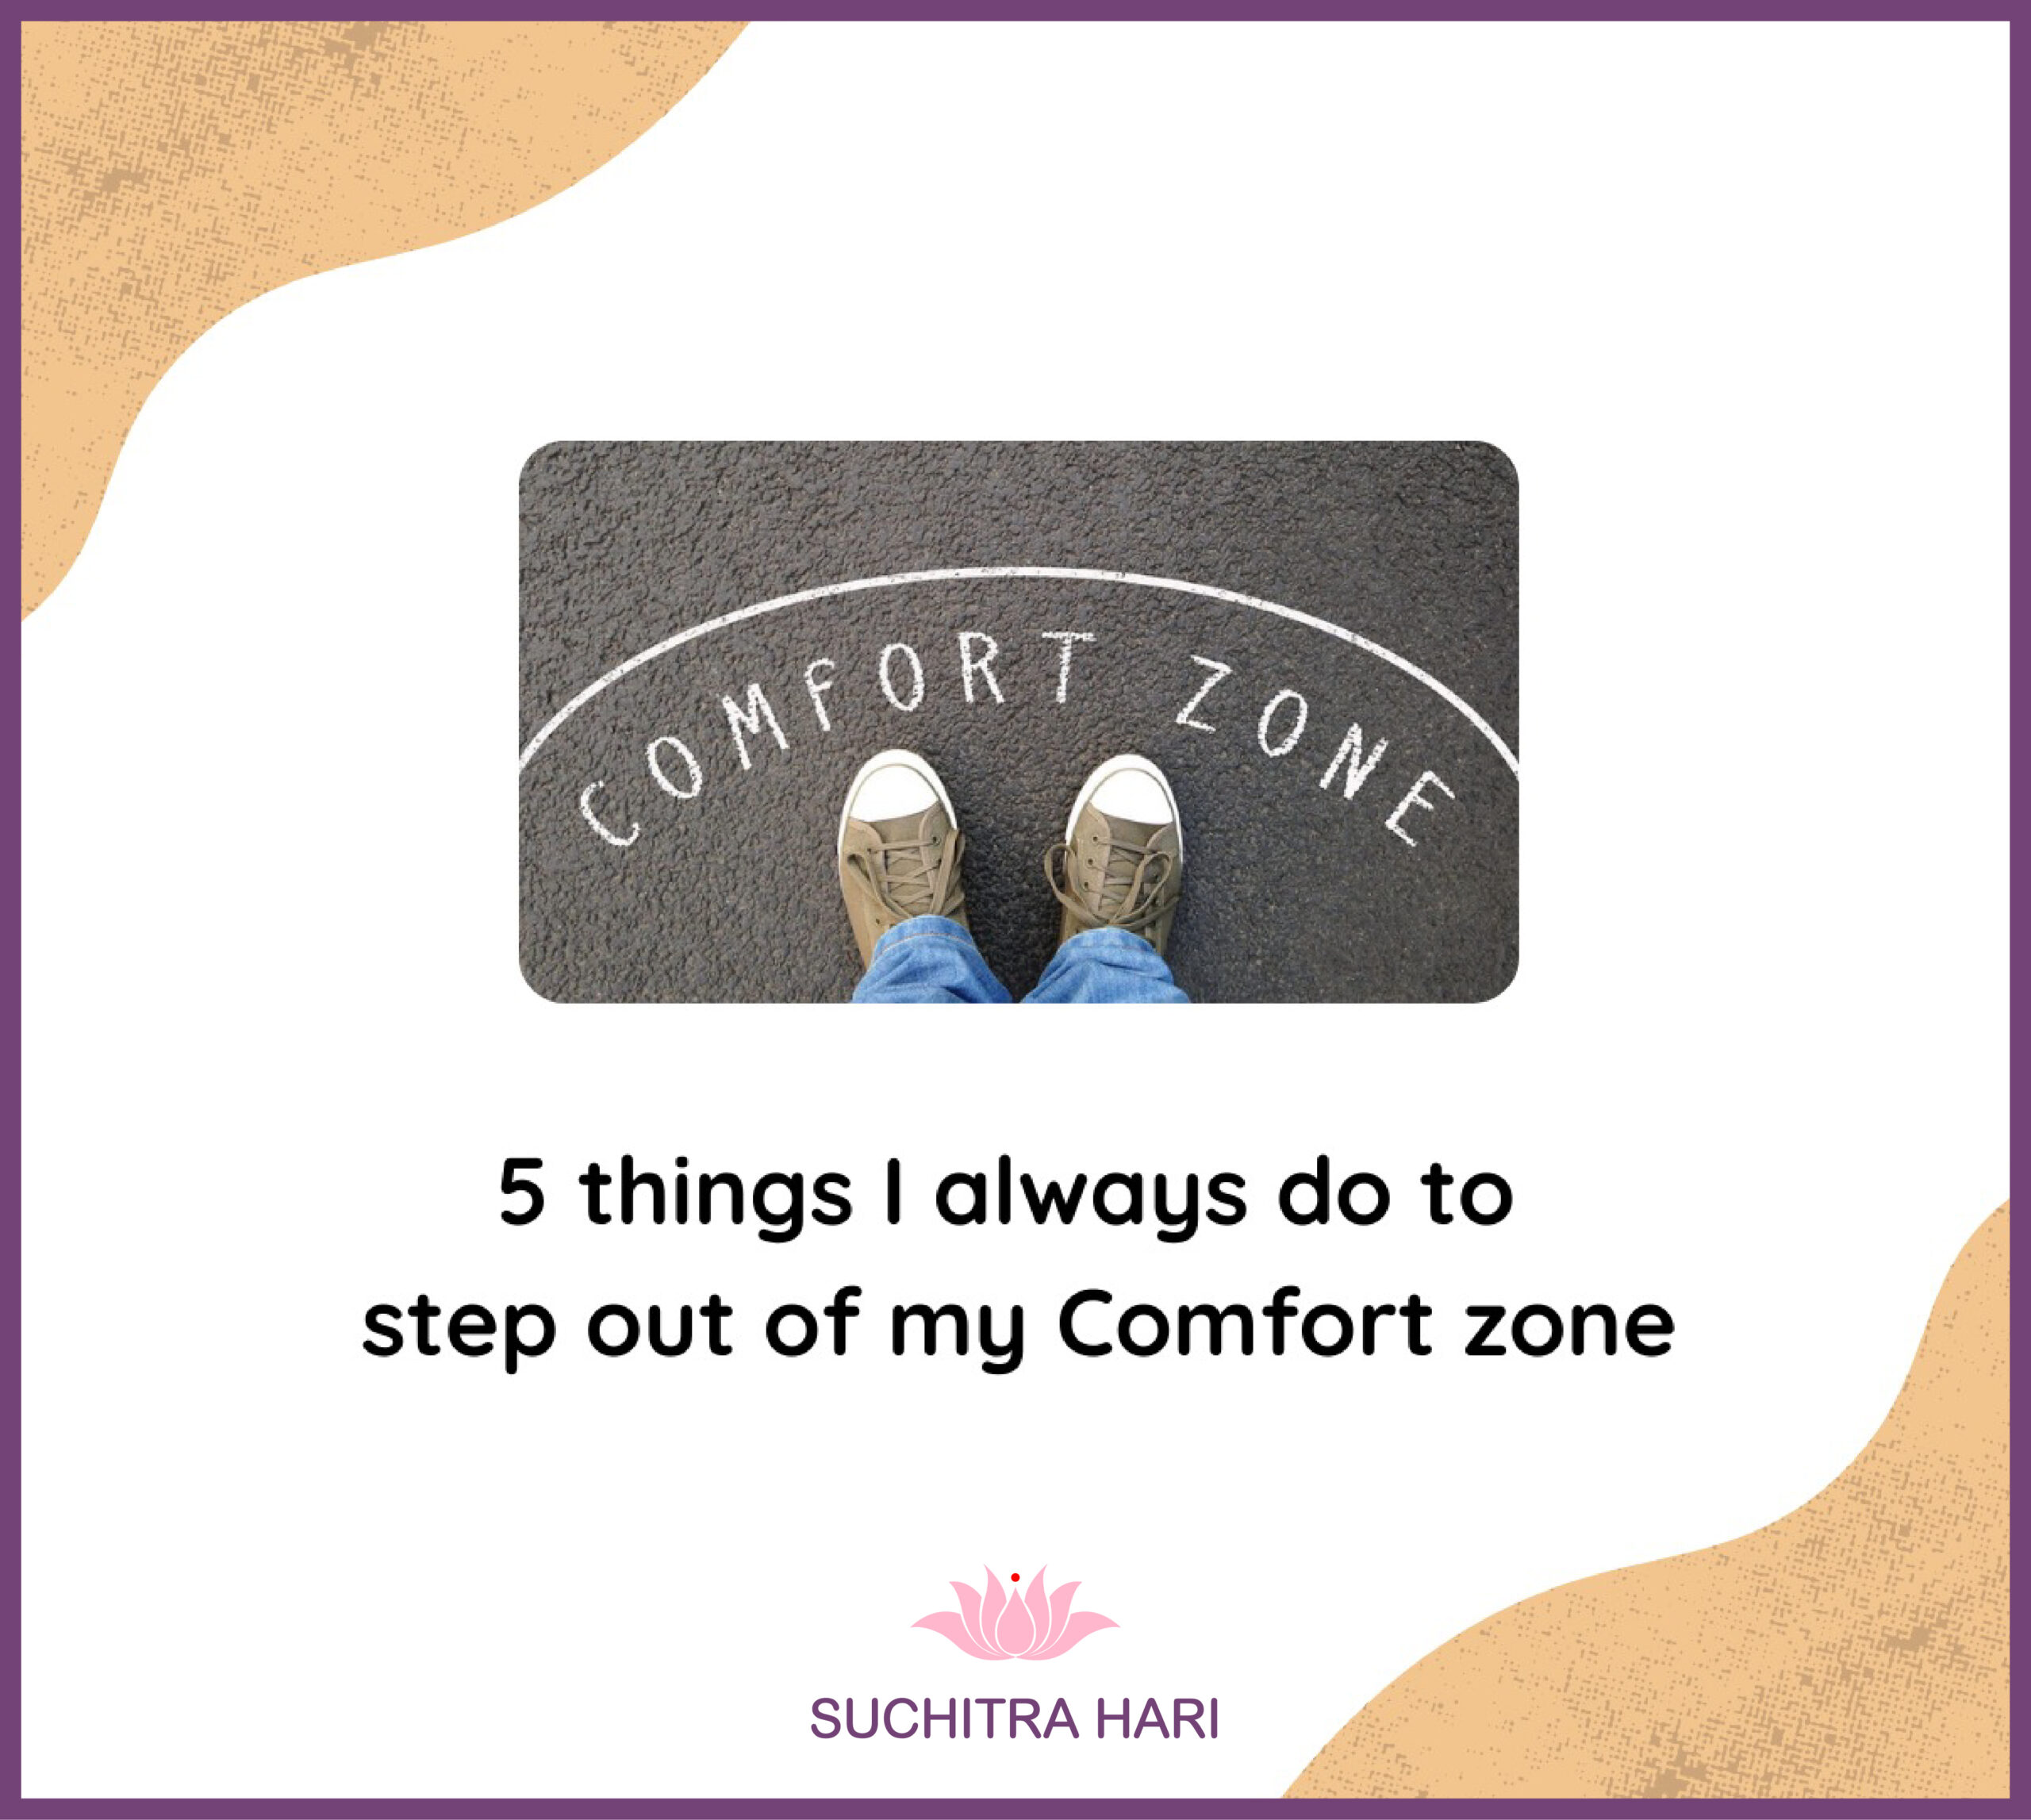 5 things I always do to step out of my Comfort zone